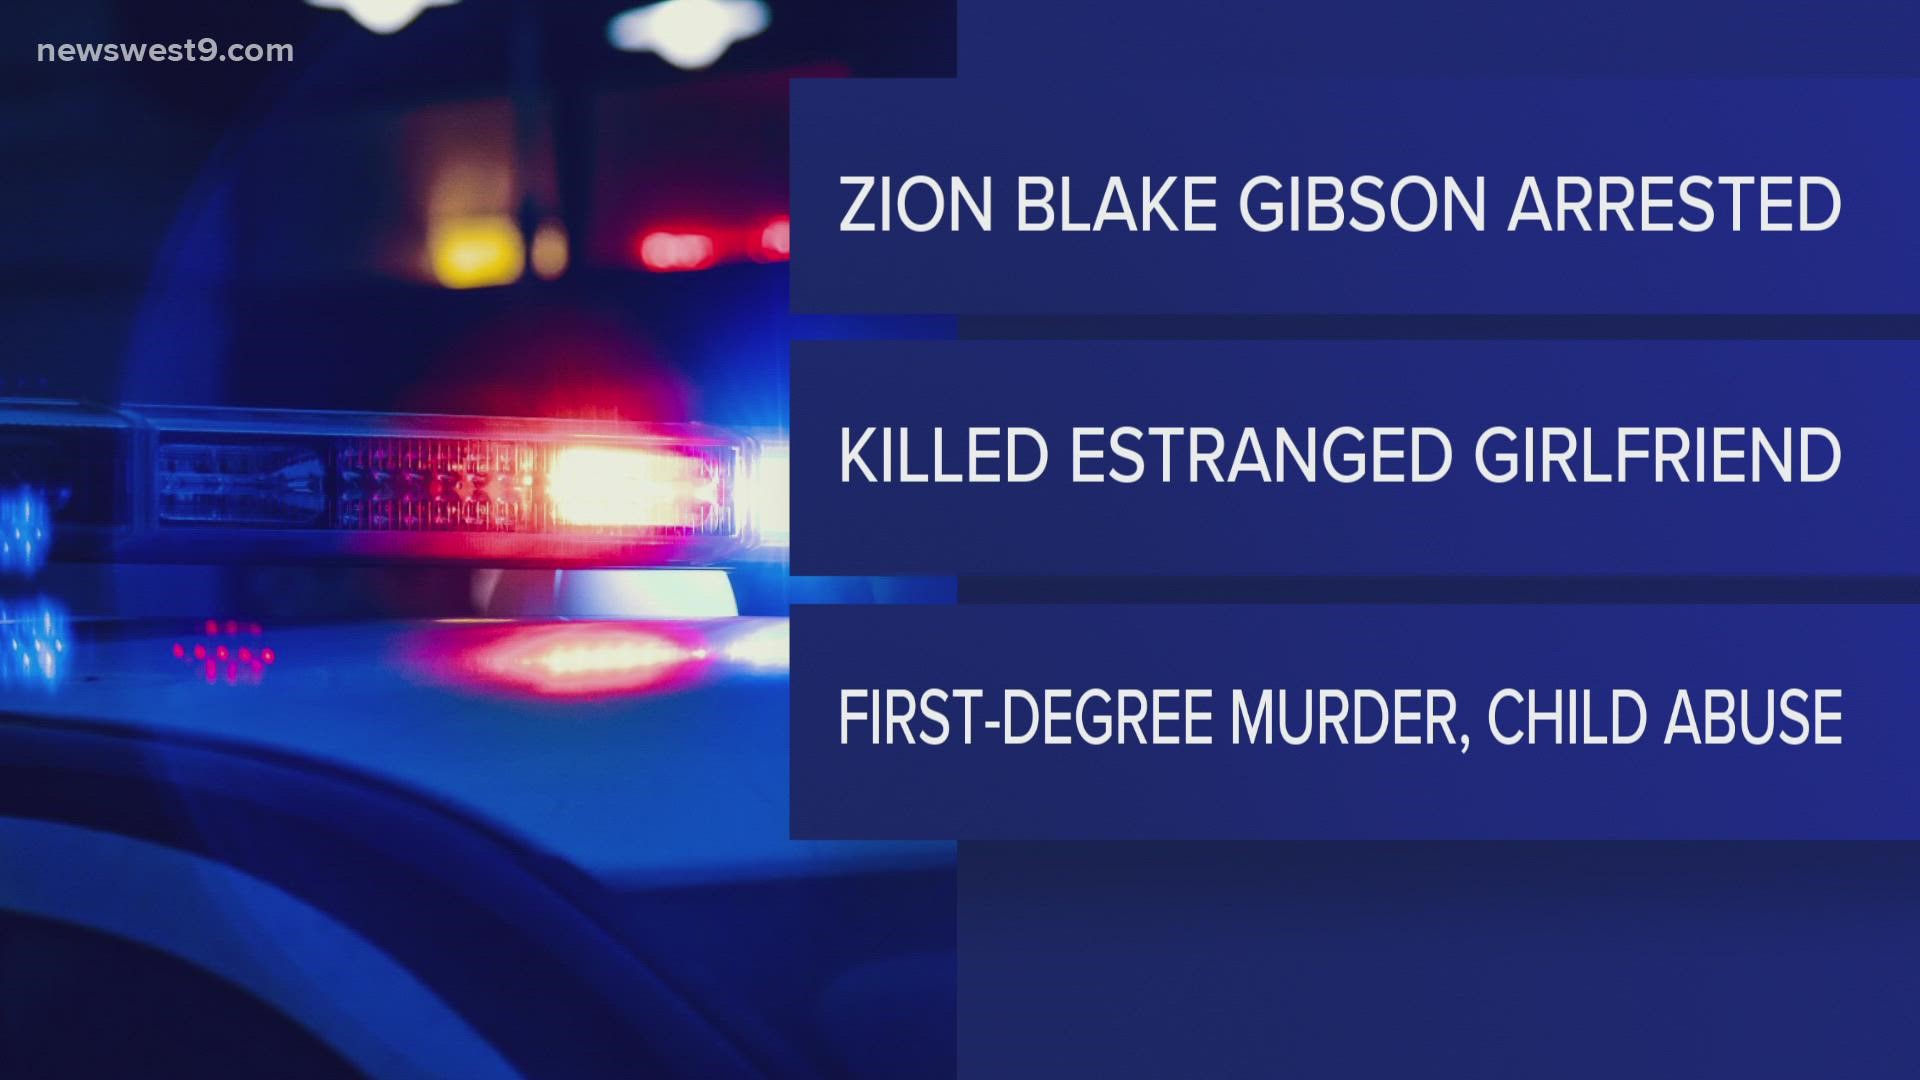 Zion Gibson has been charged with first degree murder as well as child abuse and other charges.